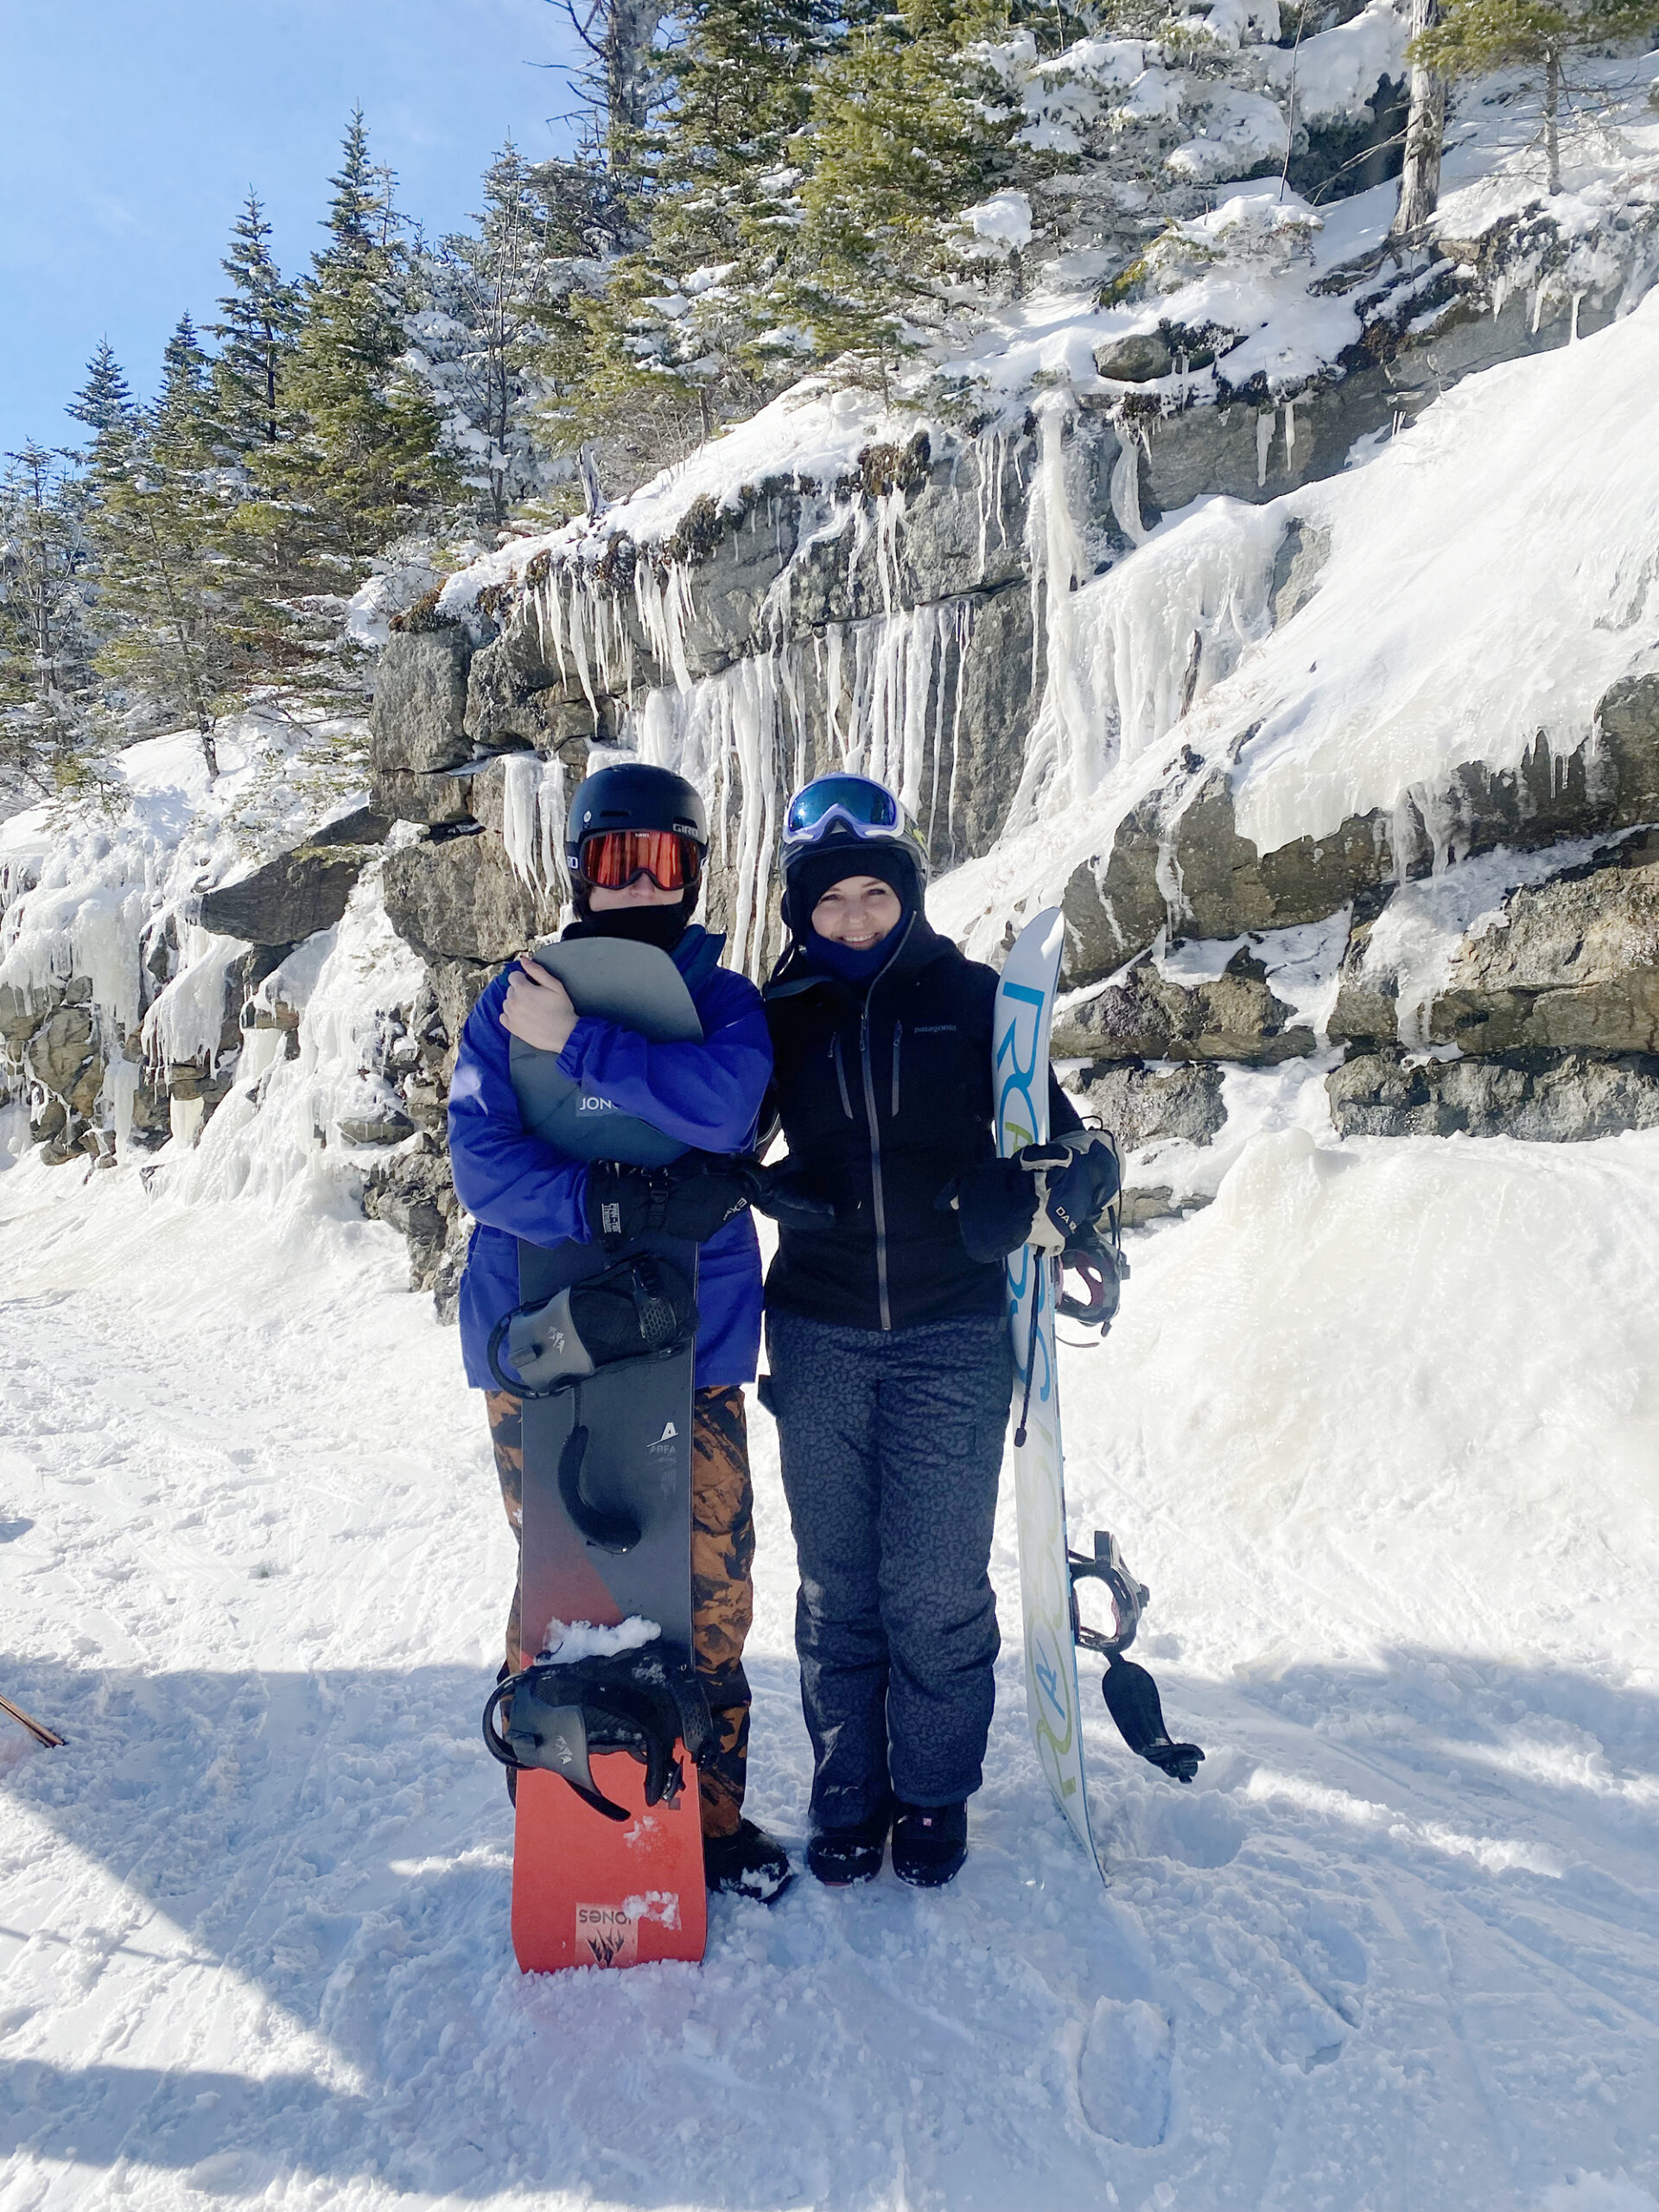 Our Favorite Vermont Ski Resorts that has the best Skiing and snow in the Northeast for avid skiers or snowboarders looking for an adventure. || Darling Darleen Top CT Lifestyle Blogger